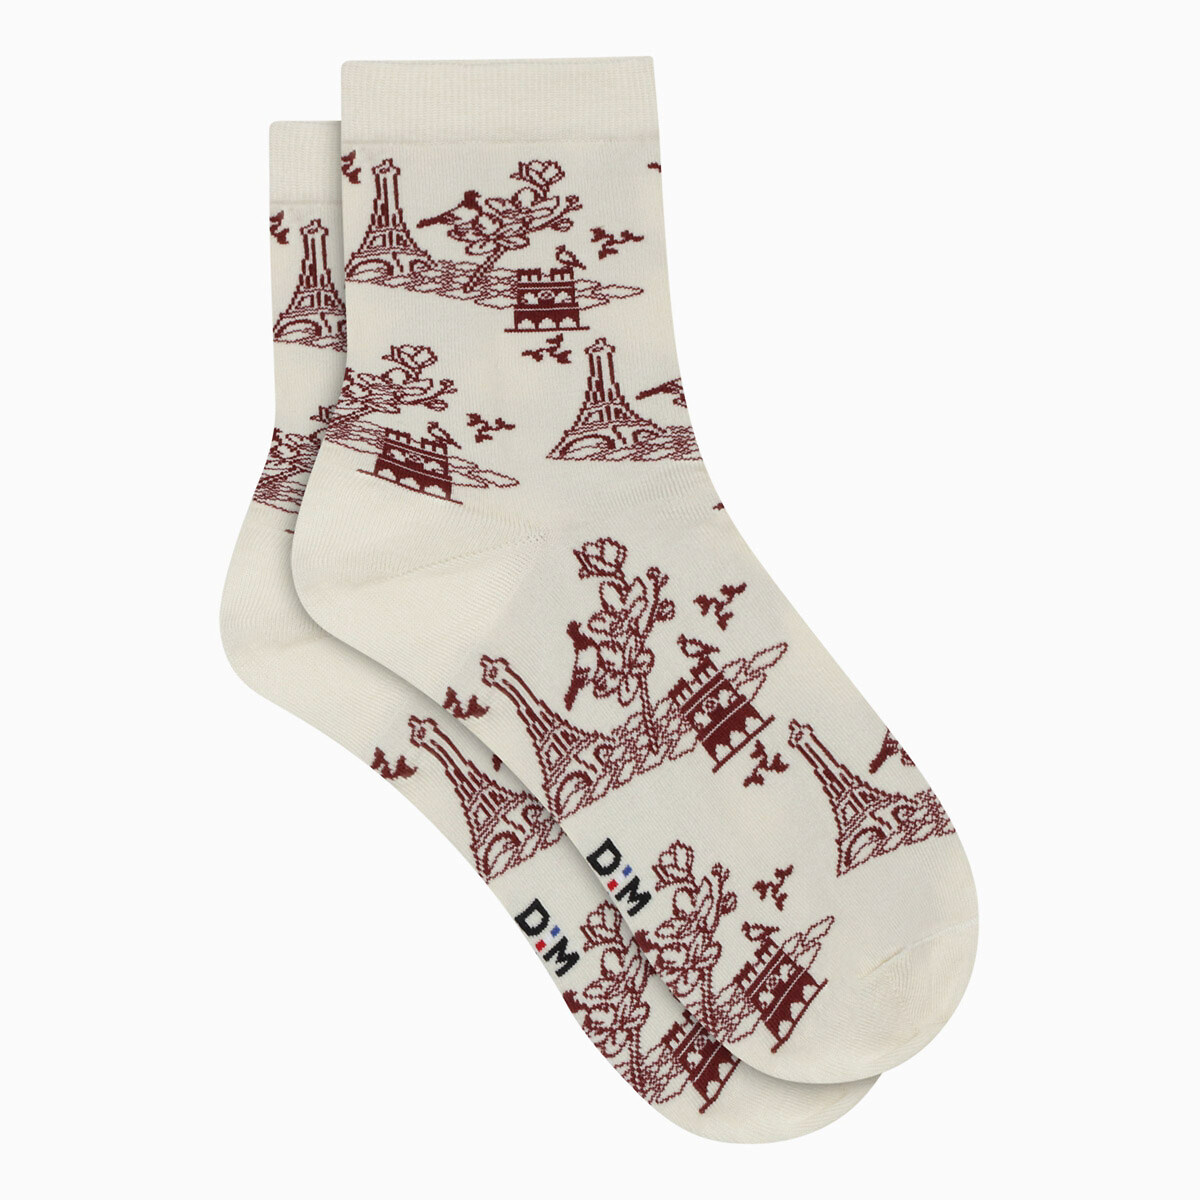 Pair of Madame Toile de Jouy Socks in Cotton Mix